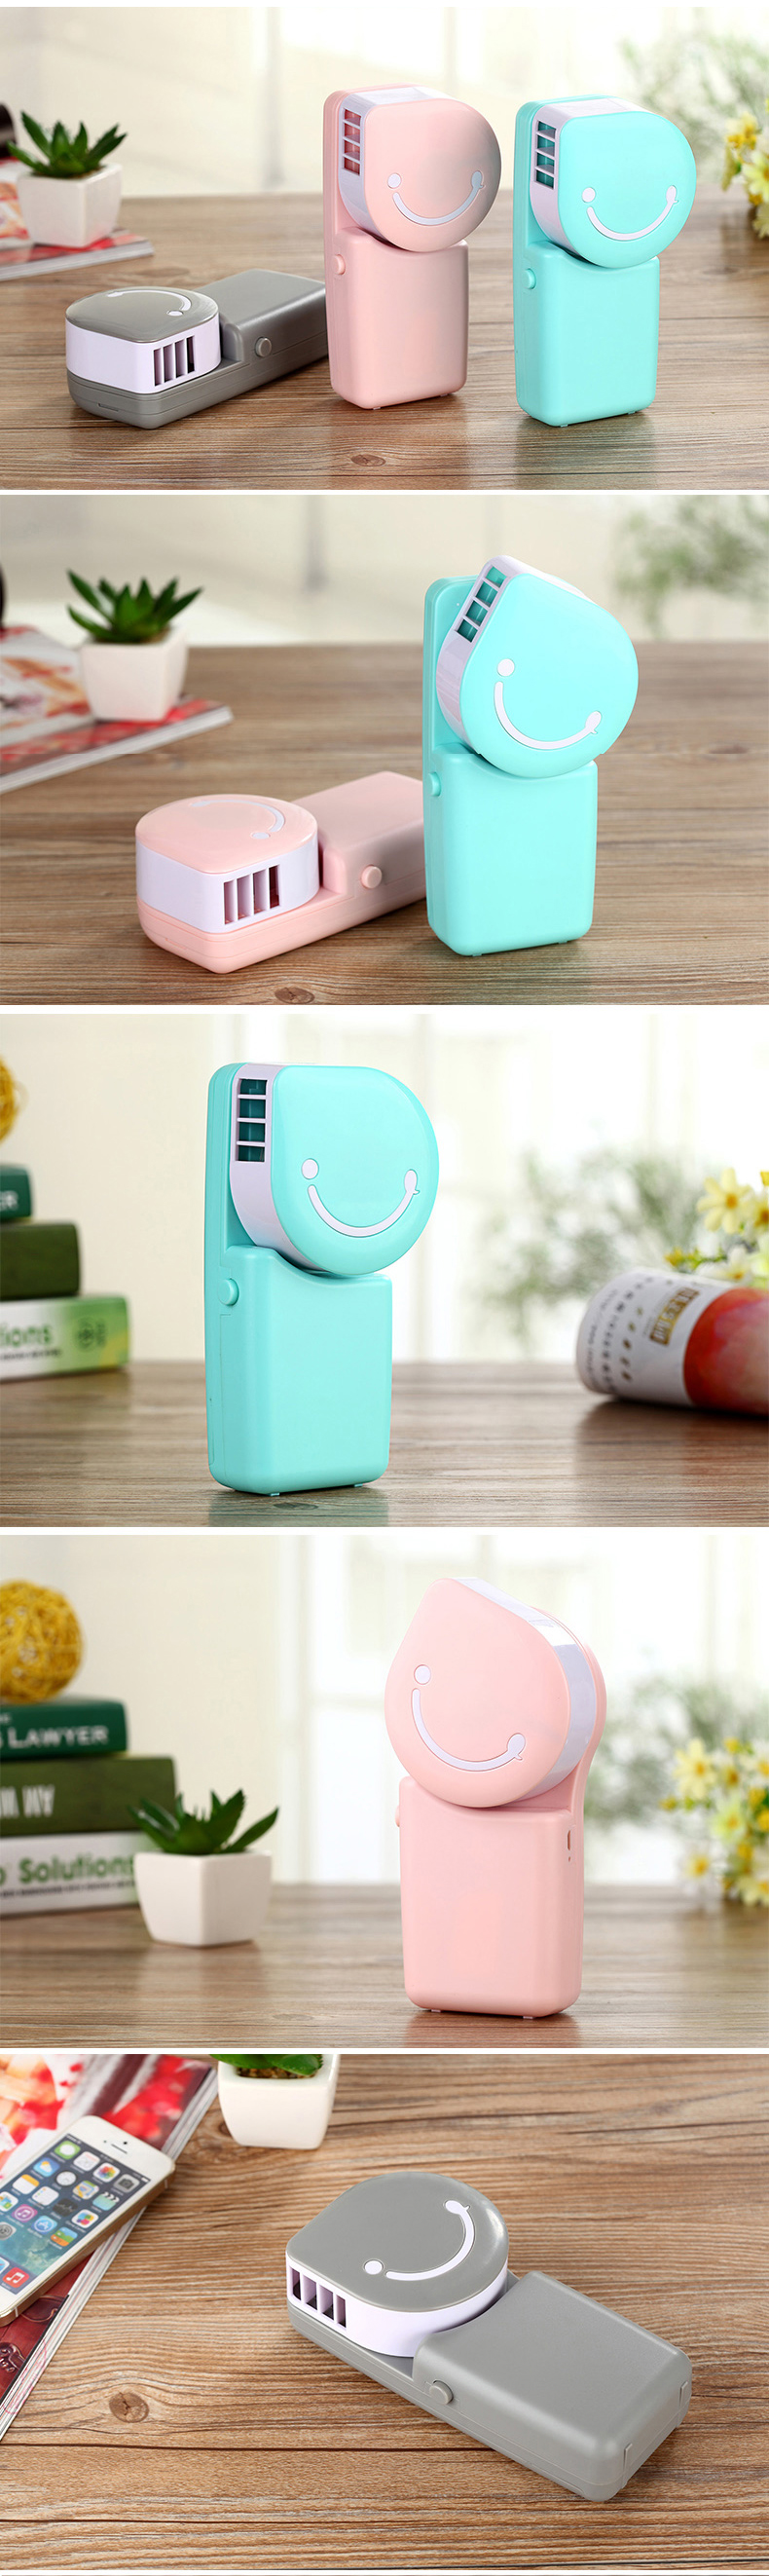 Loskii LX-882 Summer Mini Fan Cooling Portable Air Conditioning USB Charge Hand-held Cool Fan 13